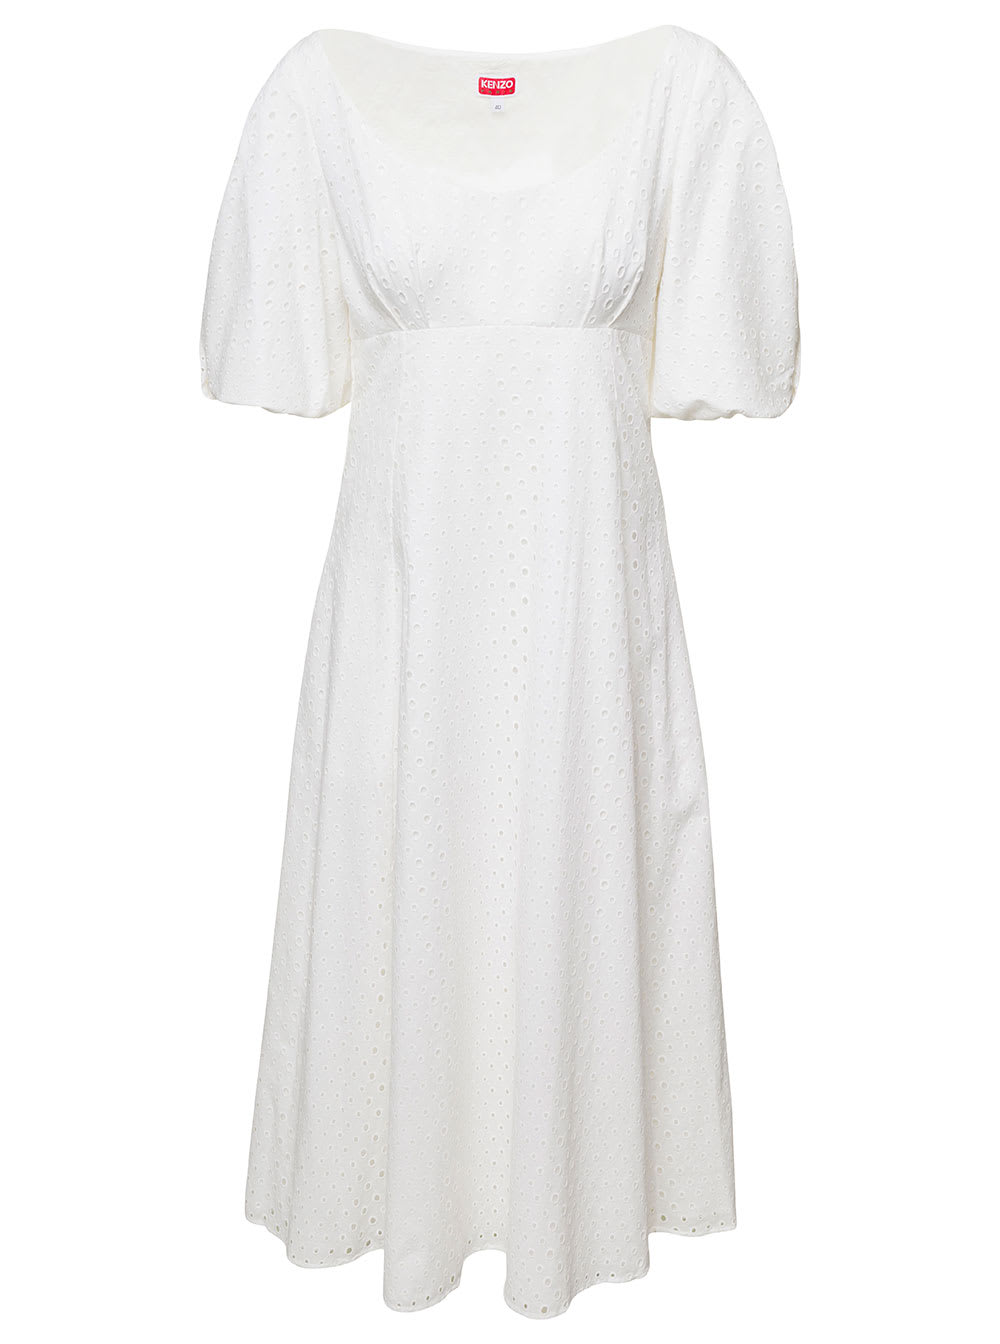 KENZO WHITE PUFF SLEEVE EMBROIDERED MIDI DRESS IN COTTON WOMAN